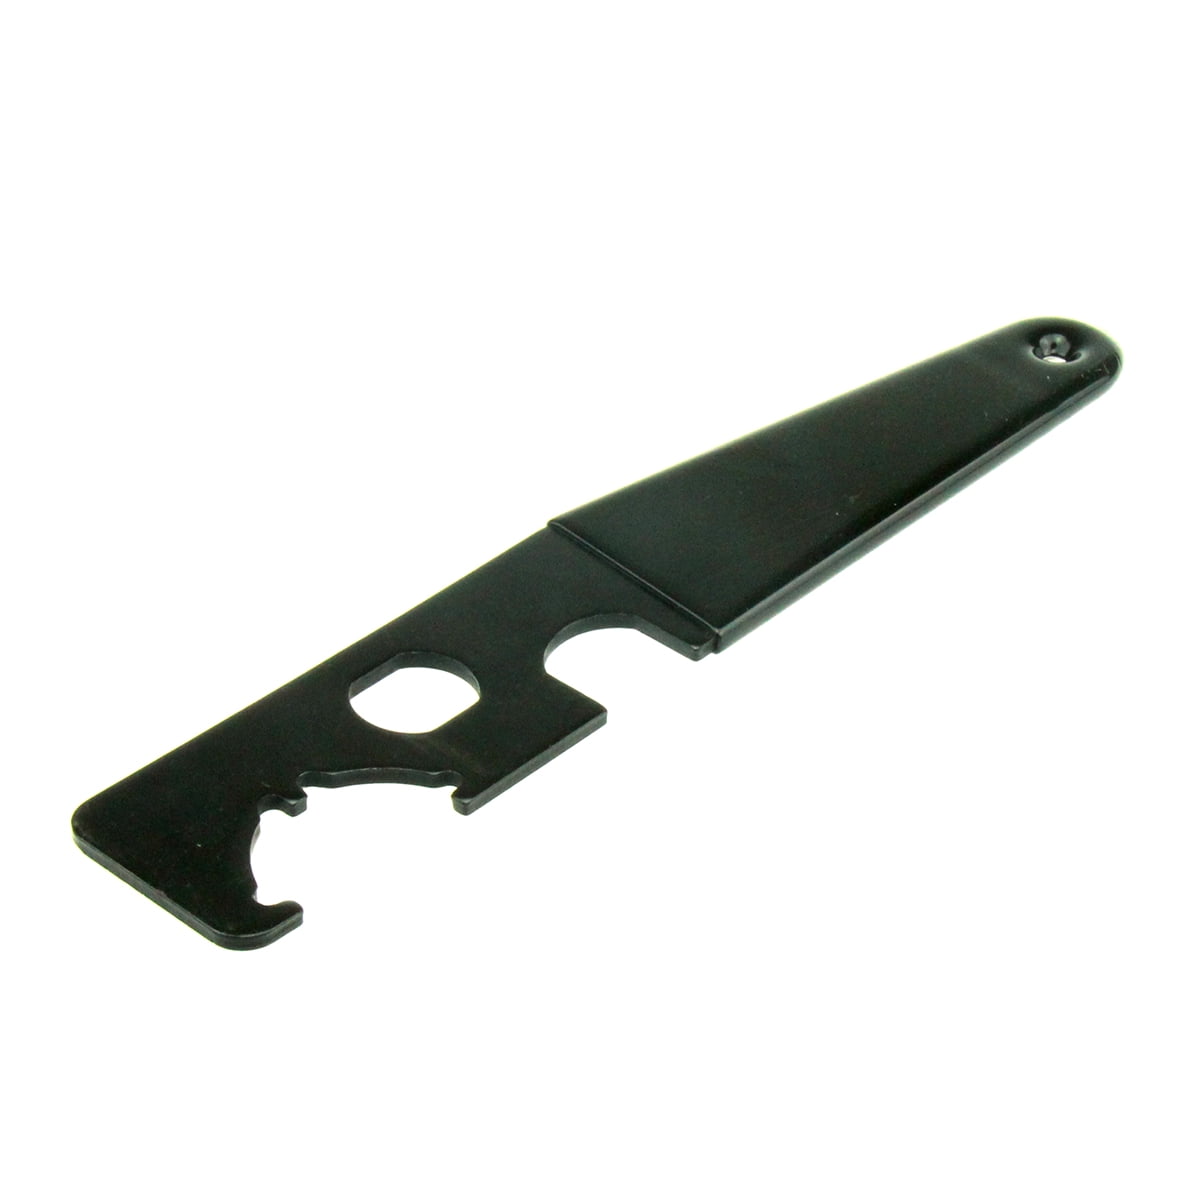 Armorers Spanner Forend Wrench Tool For Riffle Shotgun Stocks Castle Nut Stock 